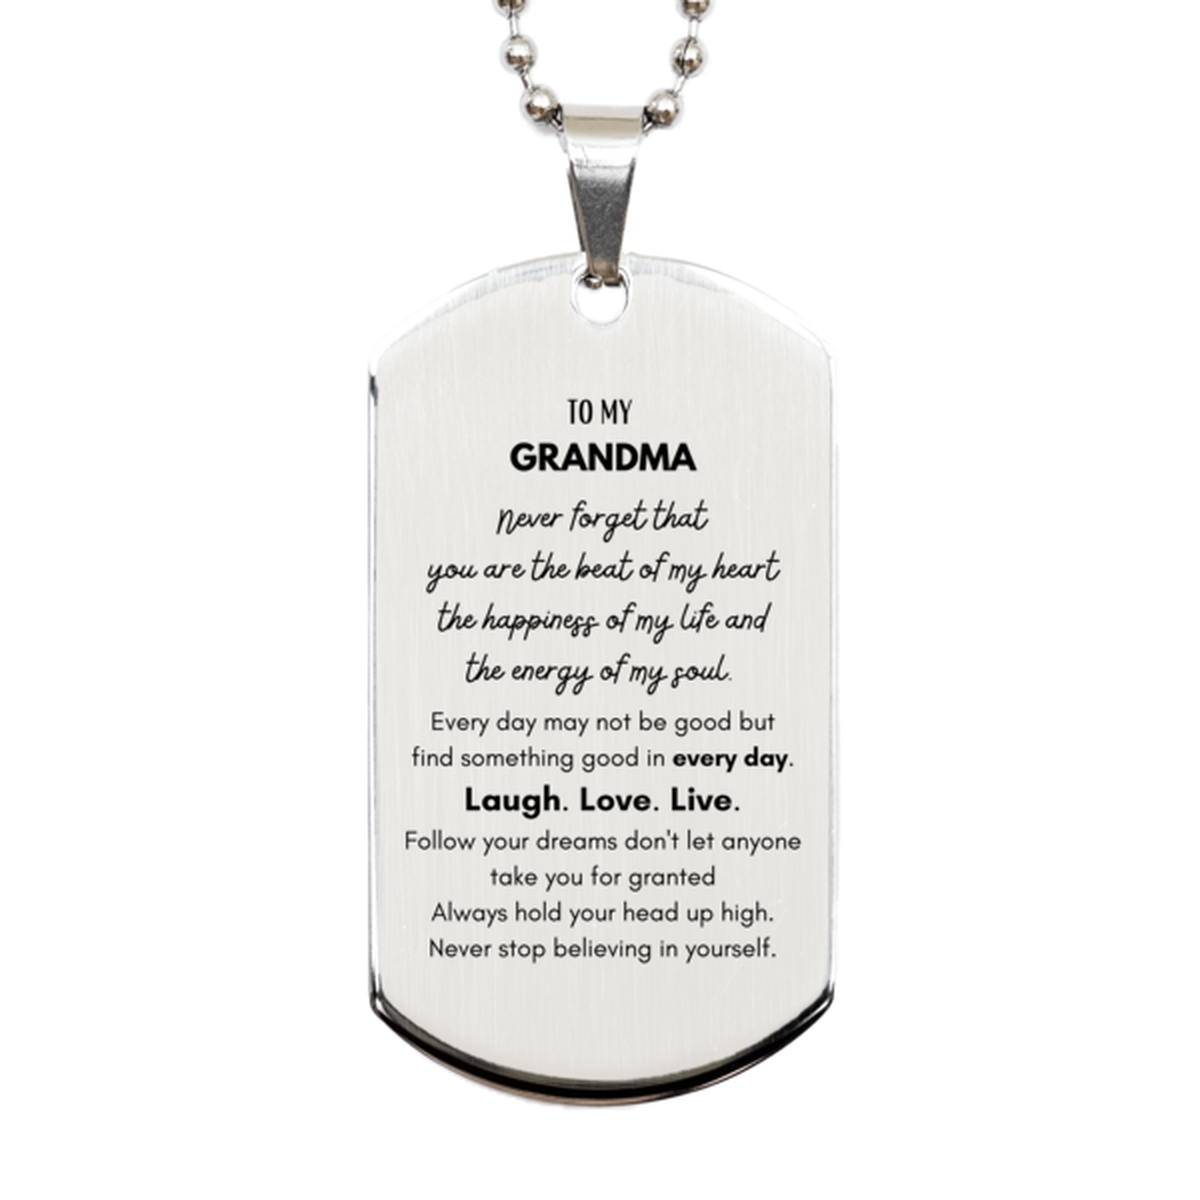 To My Grandma Dogtag Gifts, Christmas Grandma Silver Dog Tag Present, Birthday Unique Motivational For Grandma, To My Grandma Never forget that you are the beat of my heart the happiness of my life and the energy of my soul